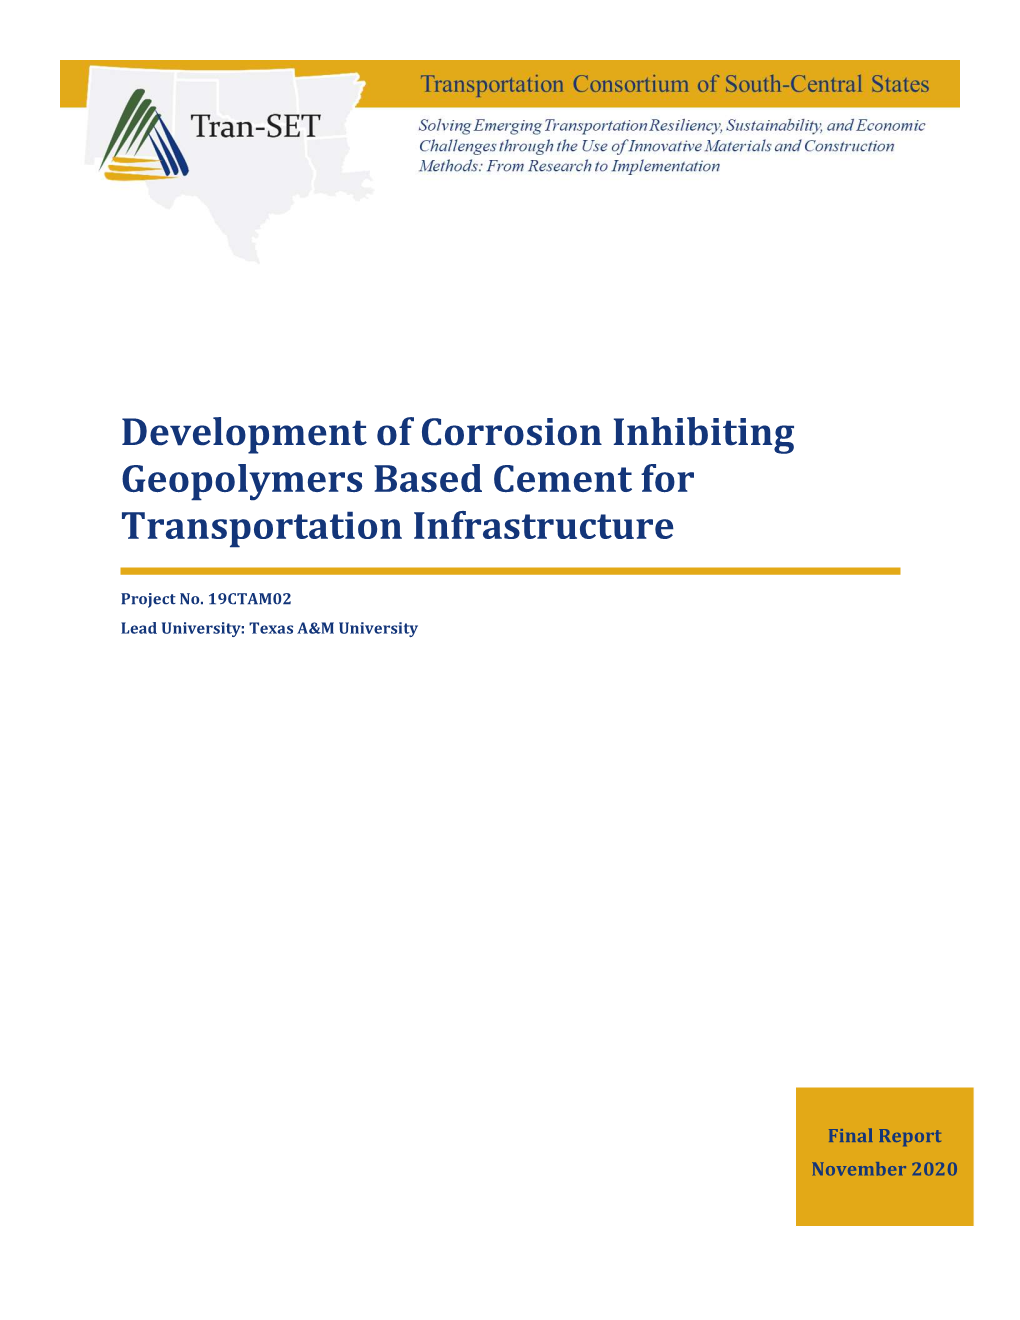 Development of Corrosion Inhibiting Geopolymers Based Cement for Transportation Infrastructure